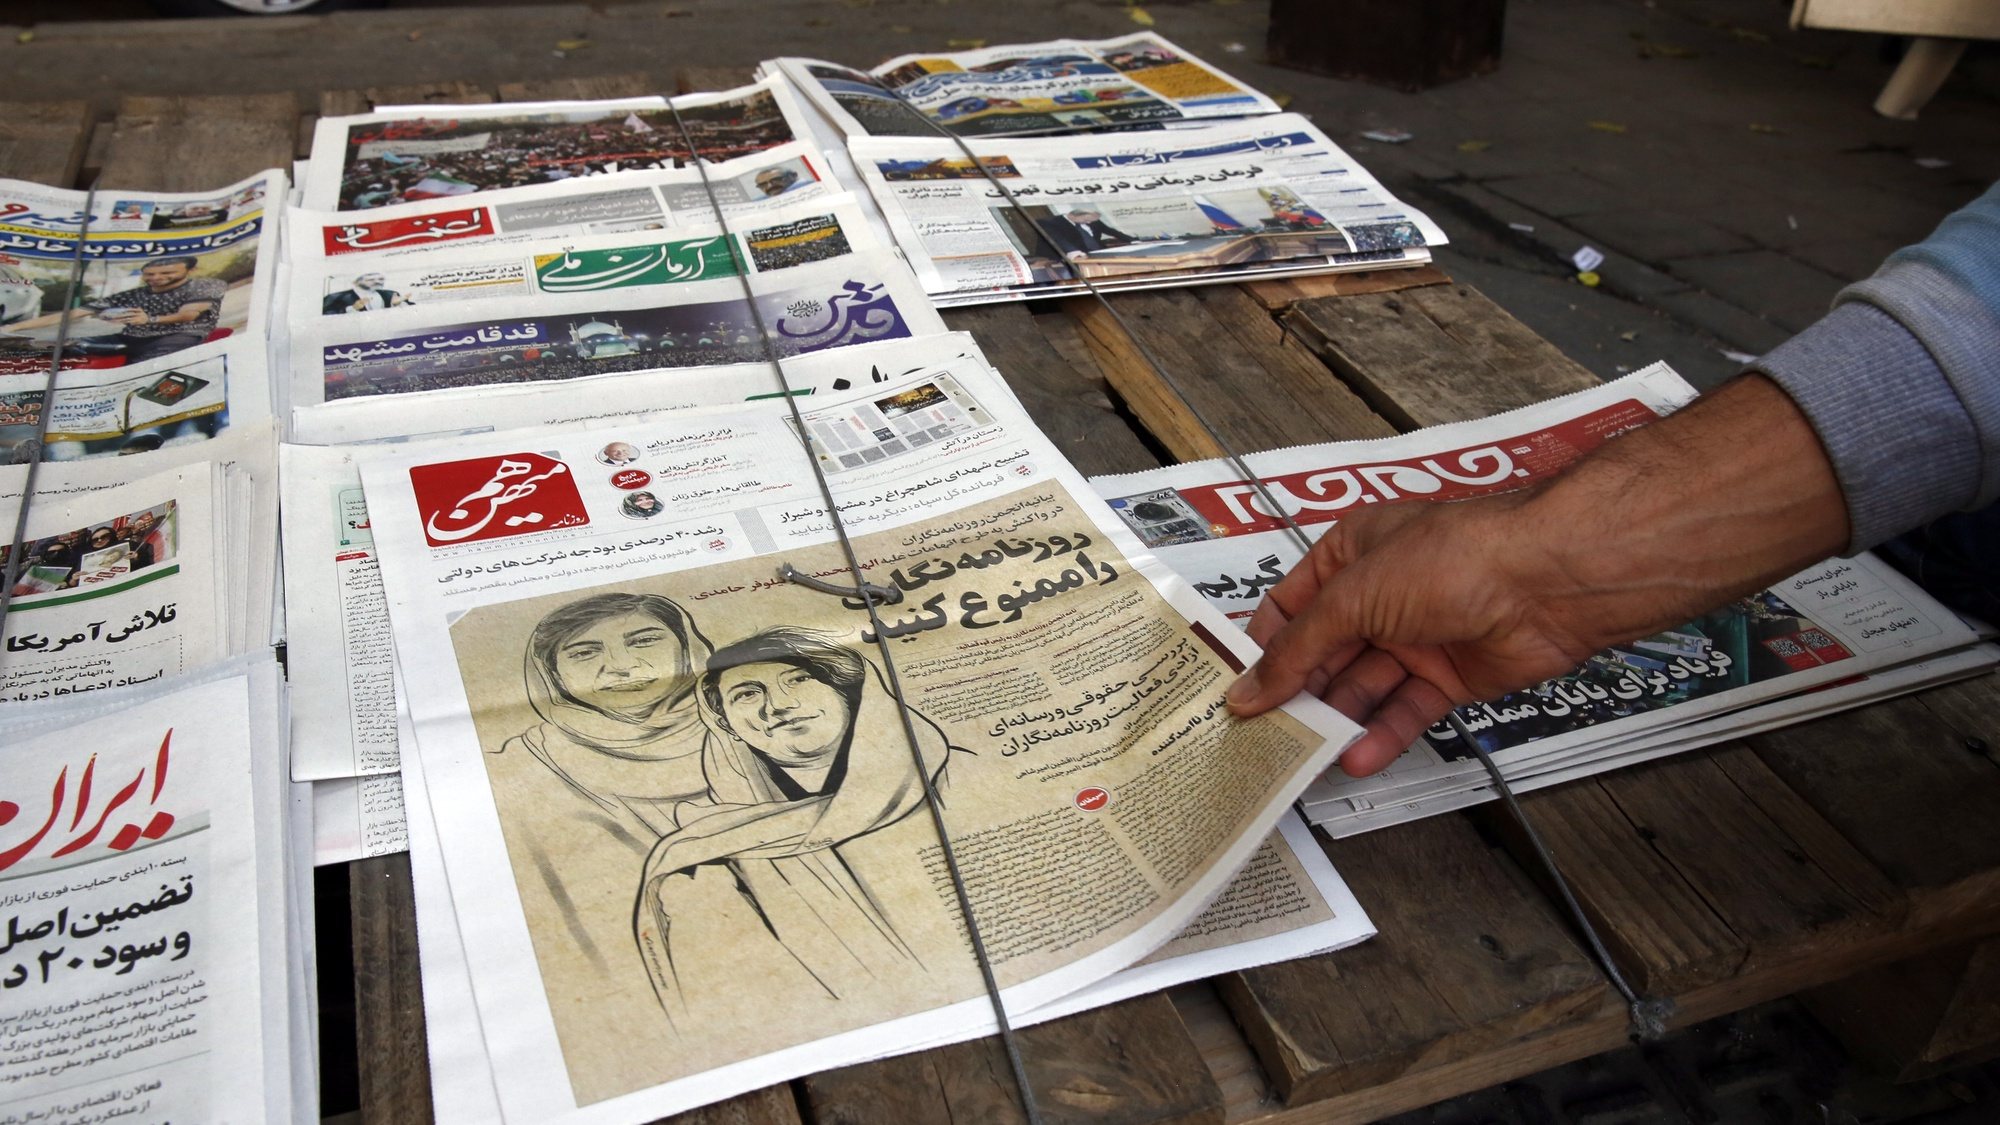 epa10274828 An Iranian man picks up a copy of Iranian daily newspaper Hammihan with a drawing featuring two Iranian female journalists Niloufar Hamedi and Elaheh Mohammadi with a title &#039;Ban the journalism&#039; referring to the statement by the Tehran journalists&#039; association against the prisoning journalists over covering protests in Iran, on display in a kiosk in Tehran, Iran, 30 October 2022. Niloufar Hamedi and Elaheh Mohammadi who are journalist for Iranian local daily newspaper were first two journalists who covered and published death of Mahsa Amini, and later were arrested and now are in prison. After Iranian government accused the two female journalists to conspiracy against the country, Tehran journalists&#039; association published a statement as saying that &#039;journalism is not a crime&#039;. Some Iranian journalists and photojournalists have been arrested and are in prison since the anti-government protests started in the country.  EPA/ABEDIN TAHERKENAREH